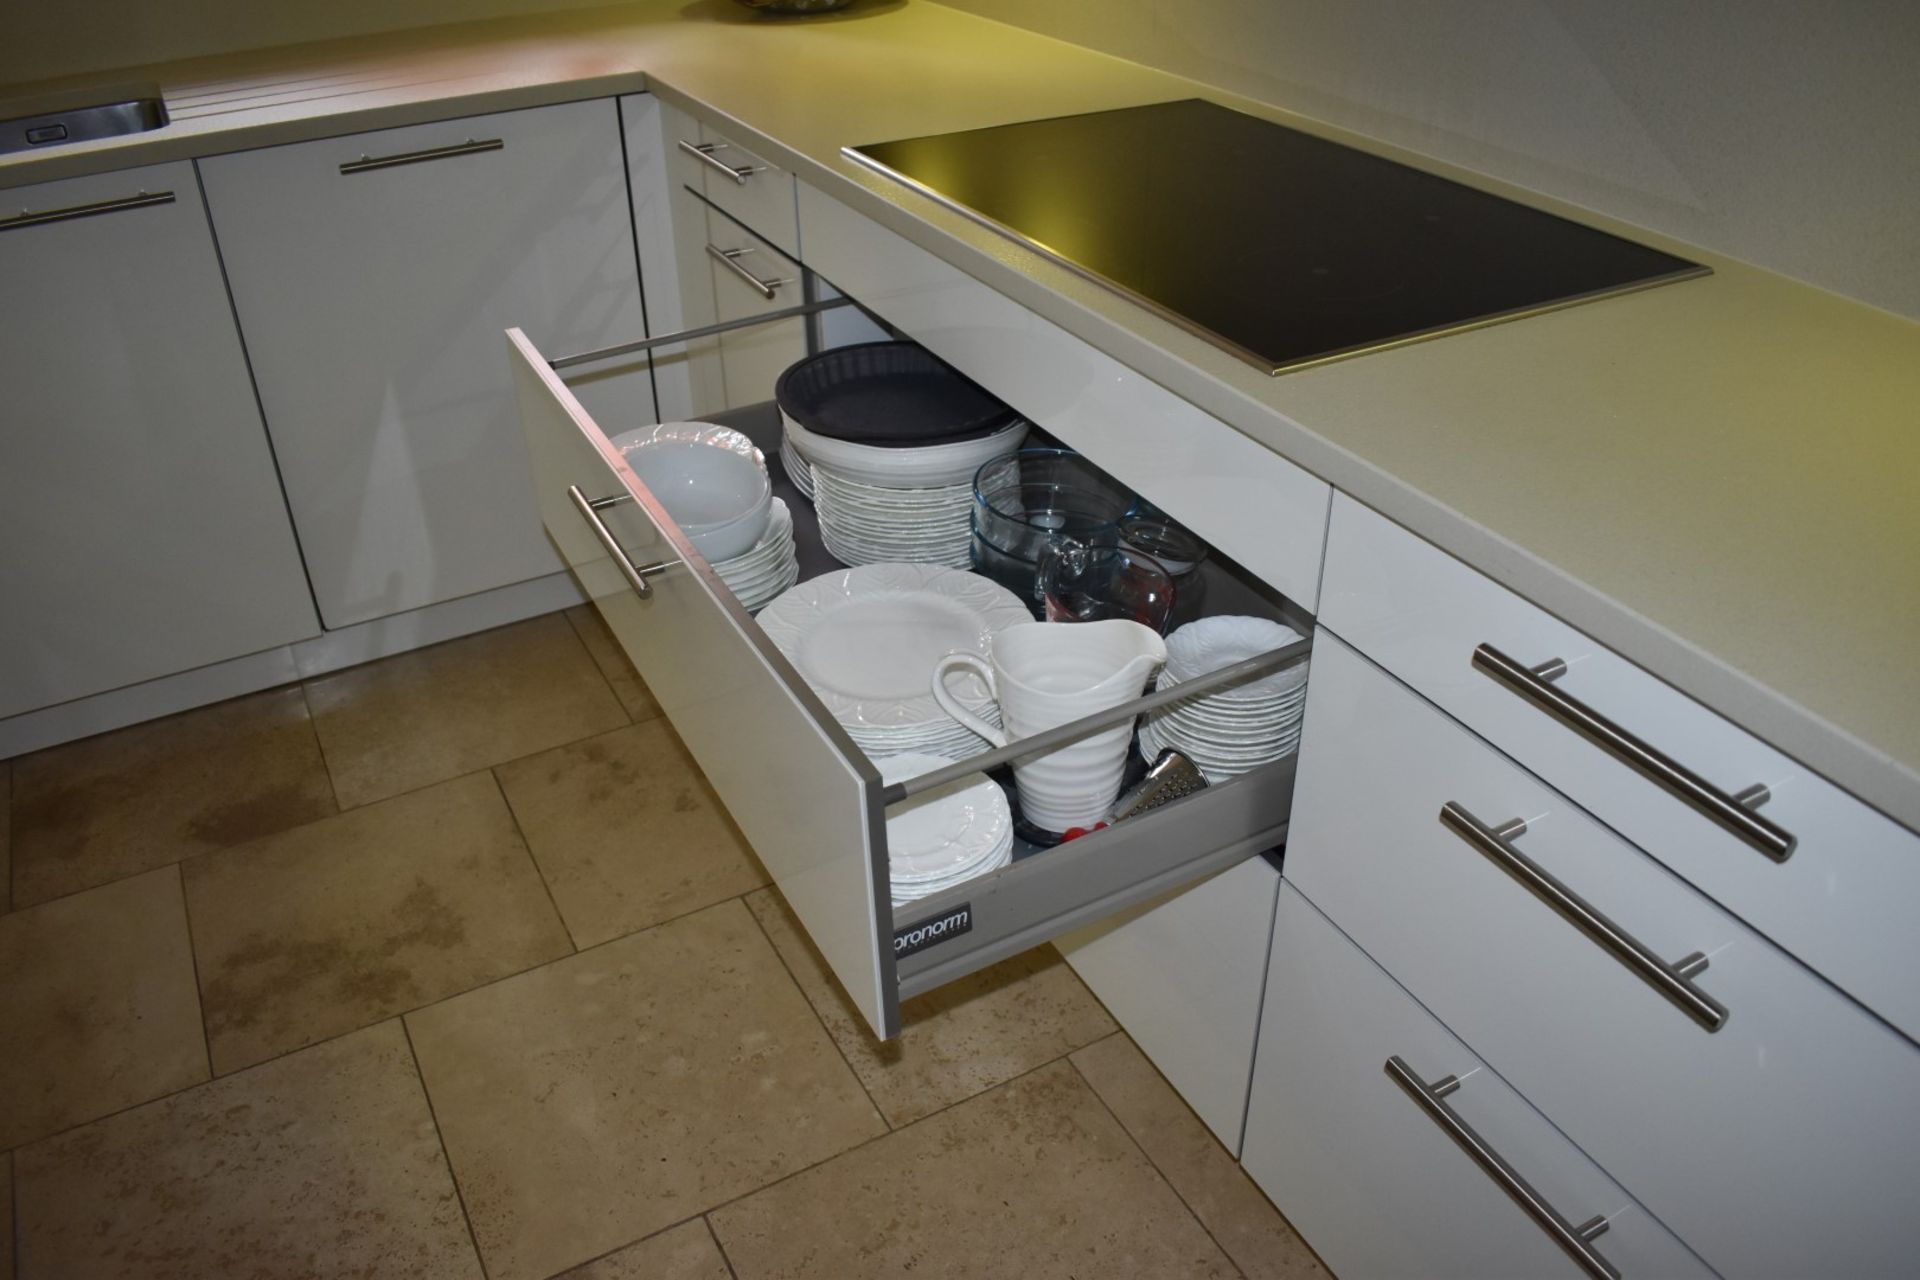 1 x Pronorm Einbauküchen German Made Fitted Kitchen With Contemporary High Gloss Cream Doors and - Image 5 of 50